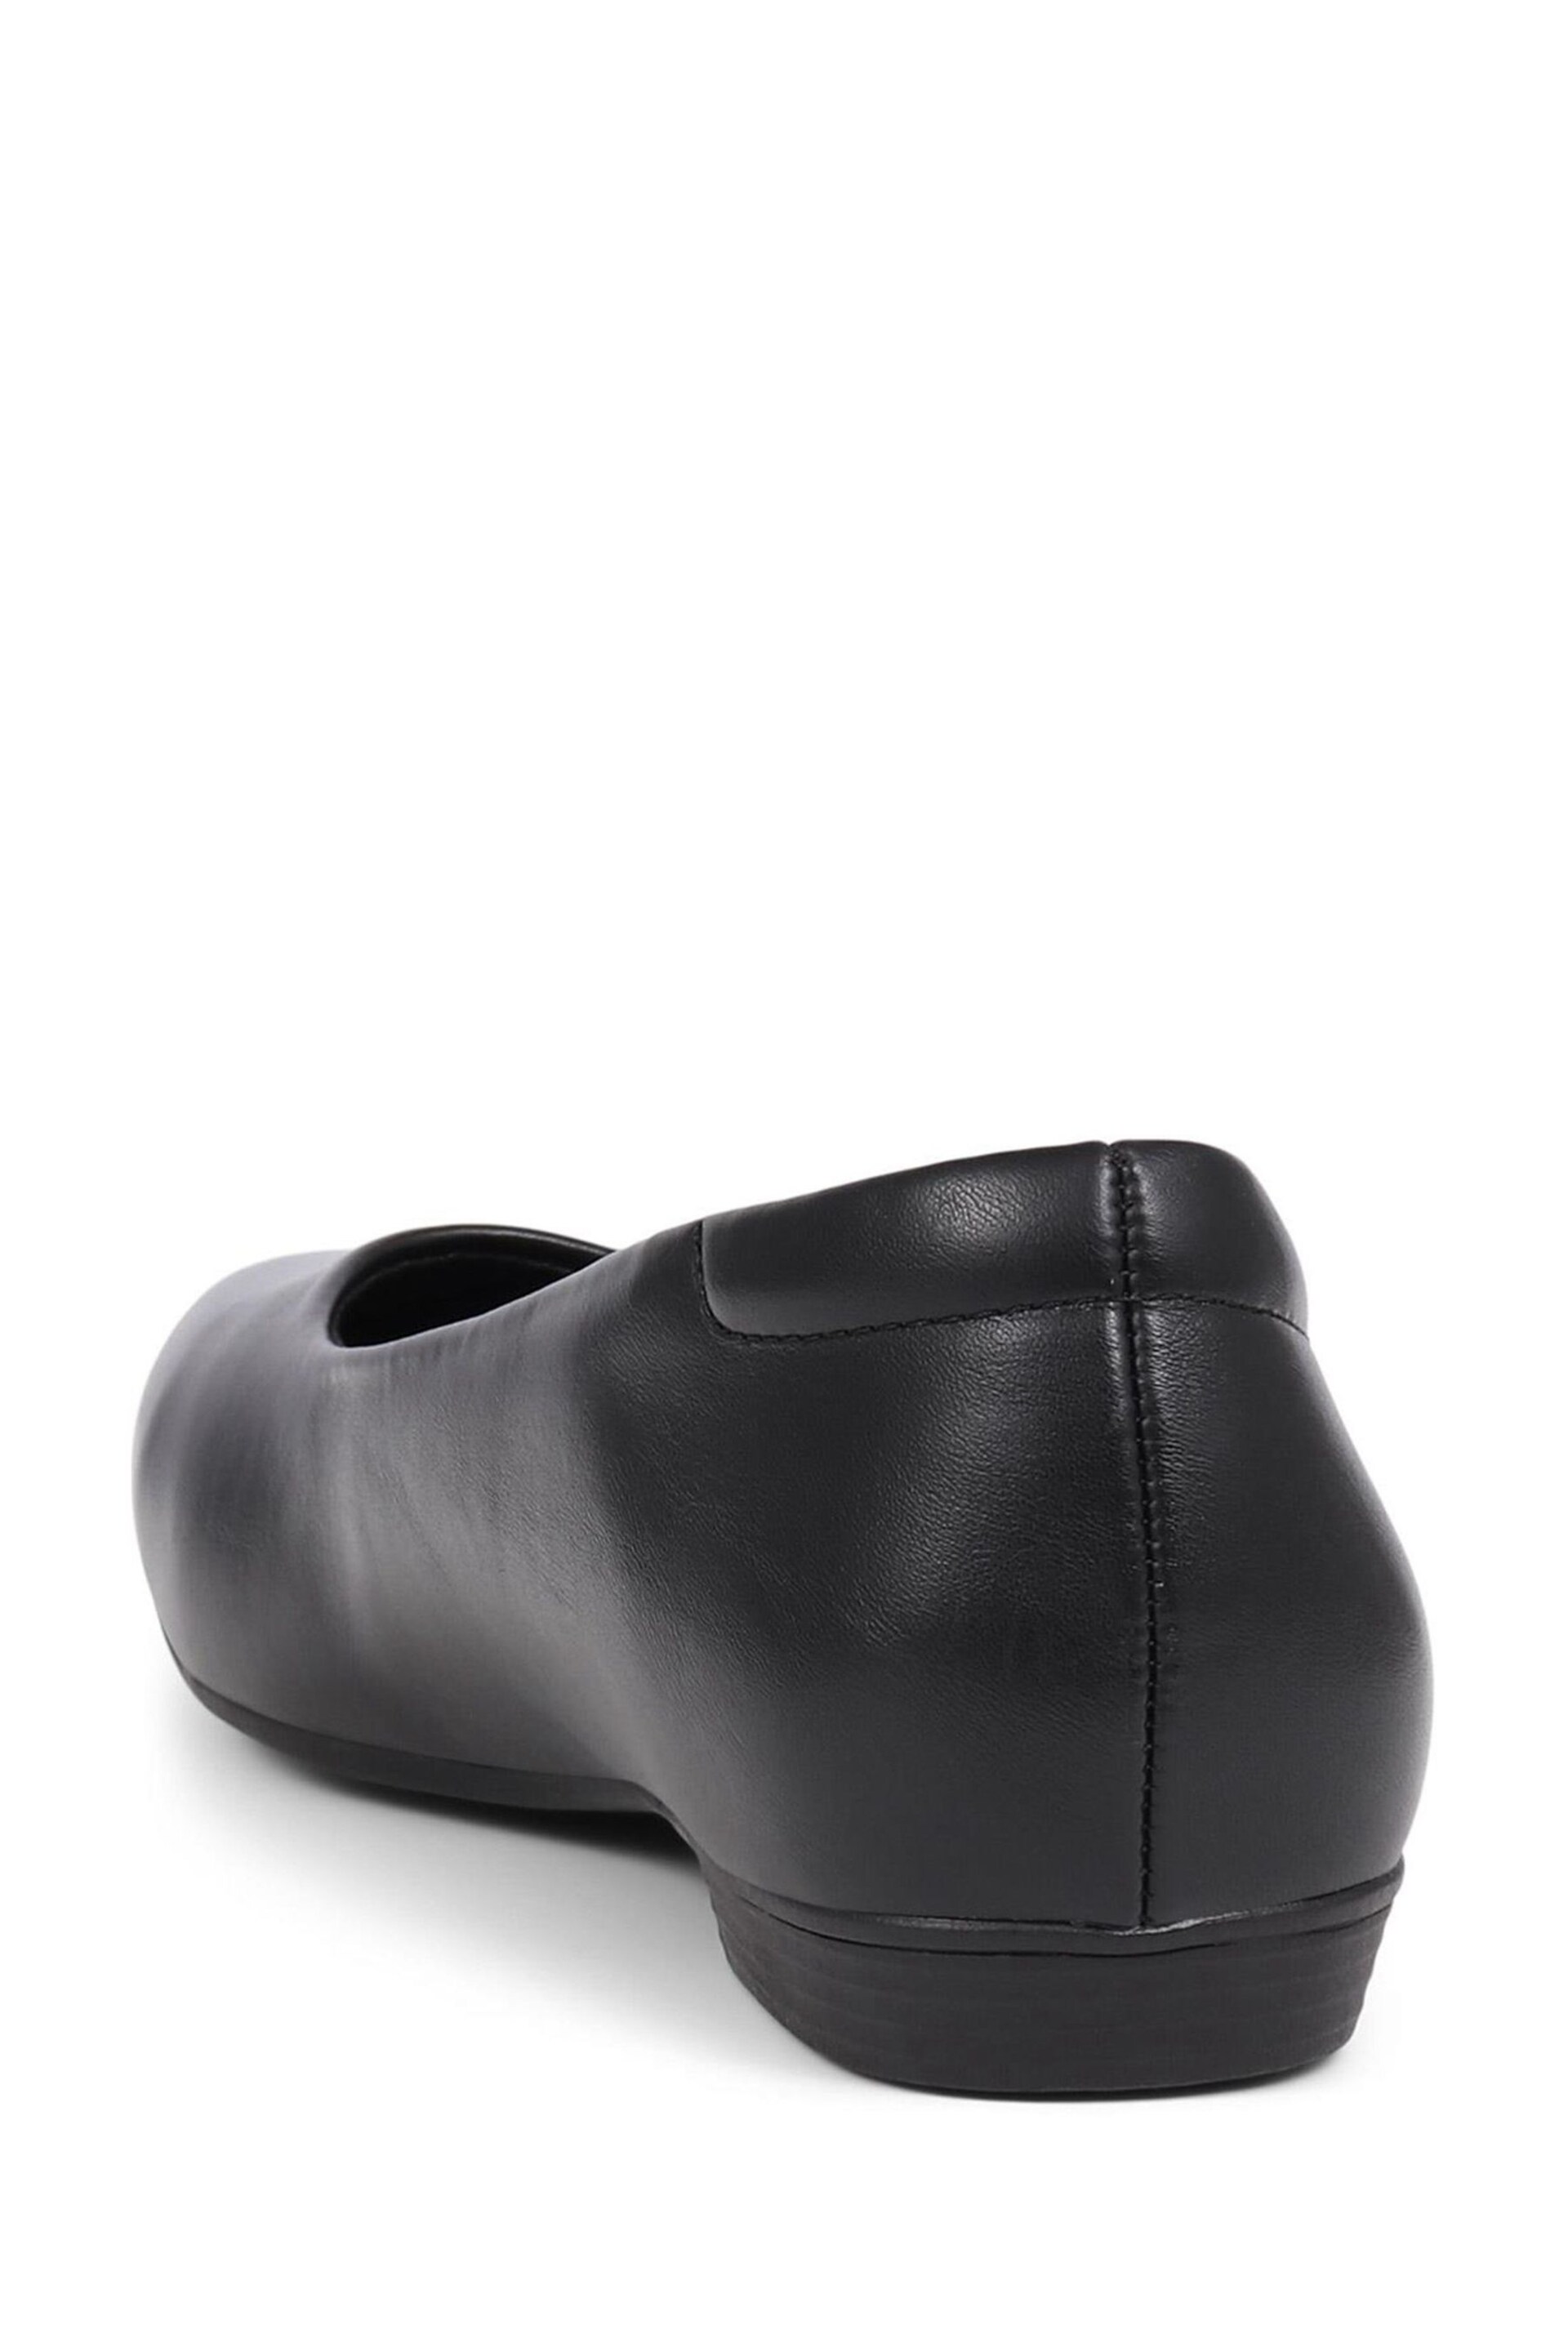 Pavers Pointed Toe Ballet Black Flats - Image 3 of 5